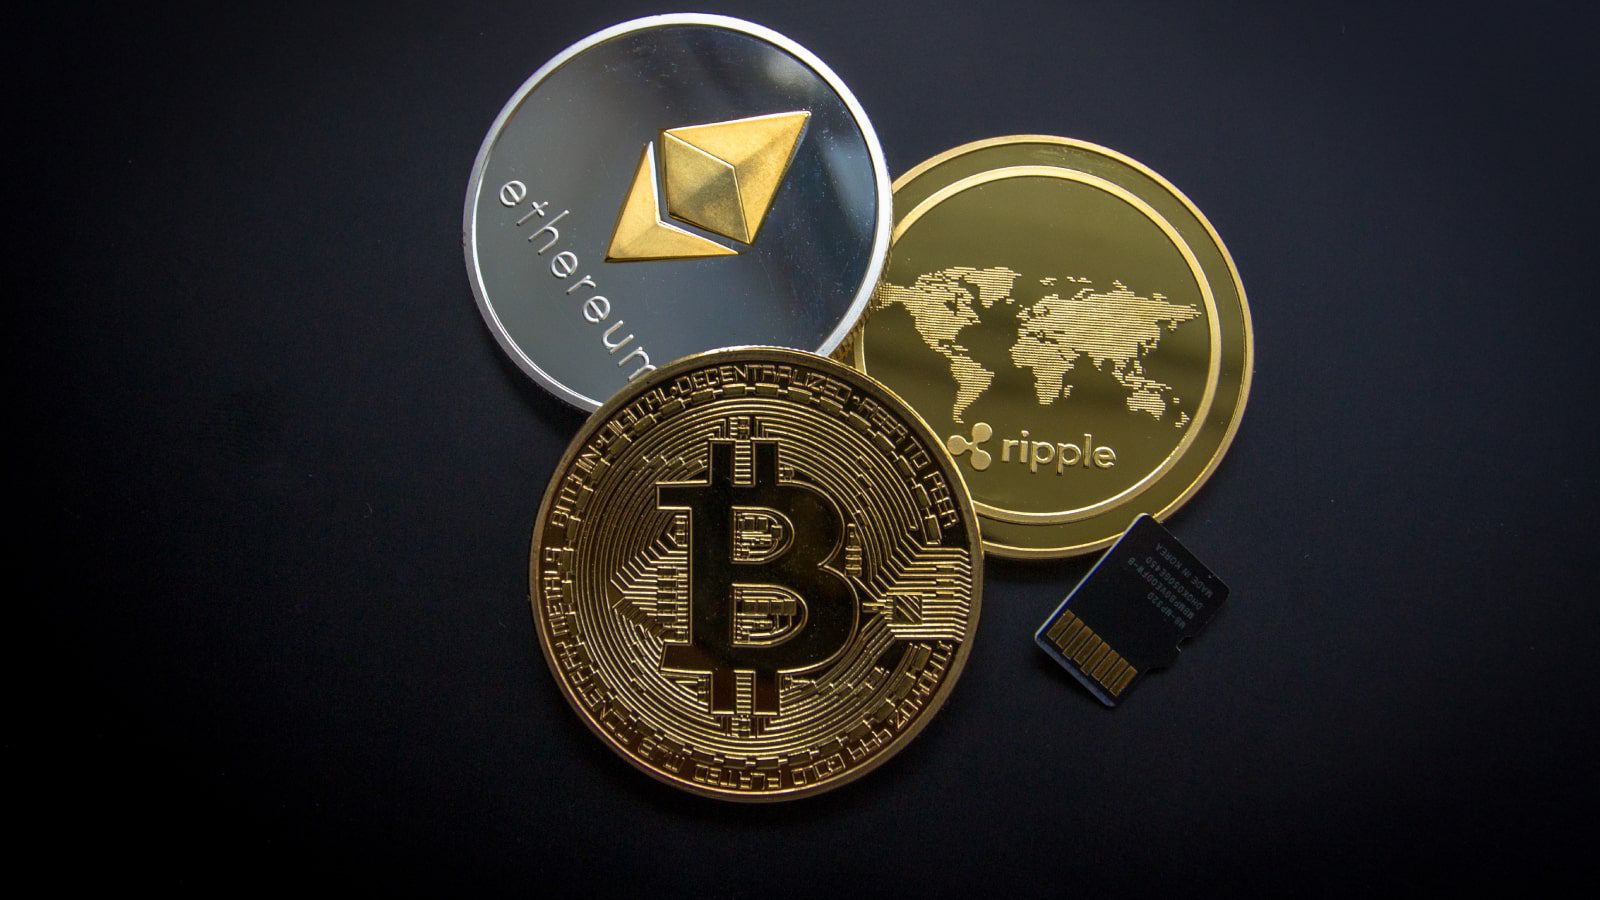 Bitcoin, Ripple. and Ethereum coins.